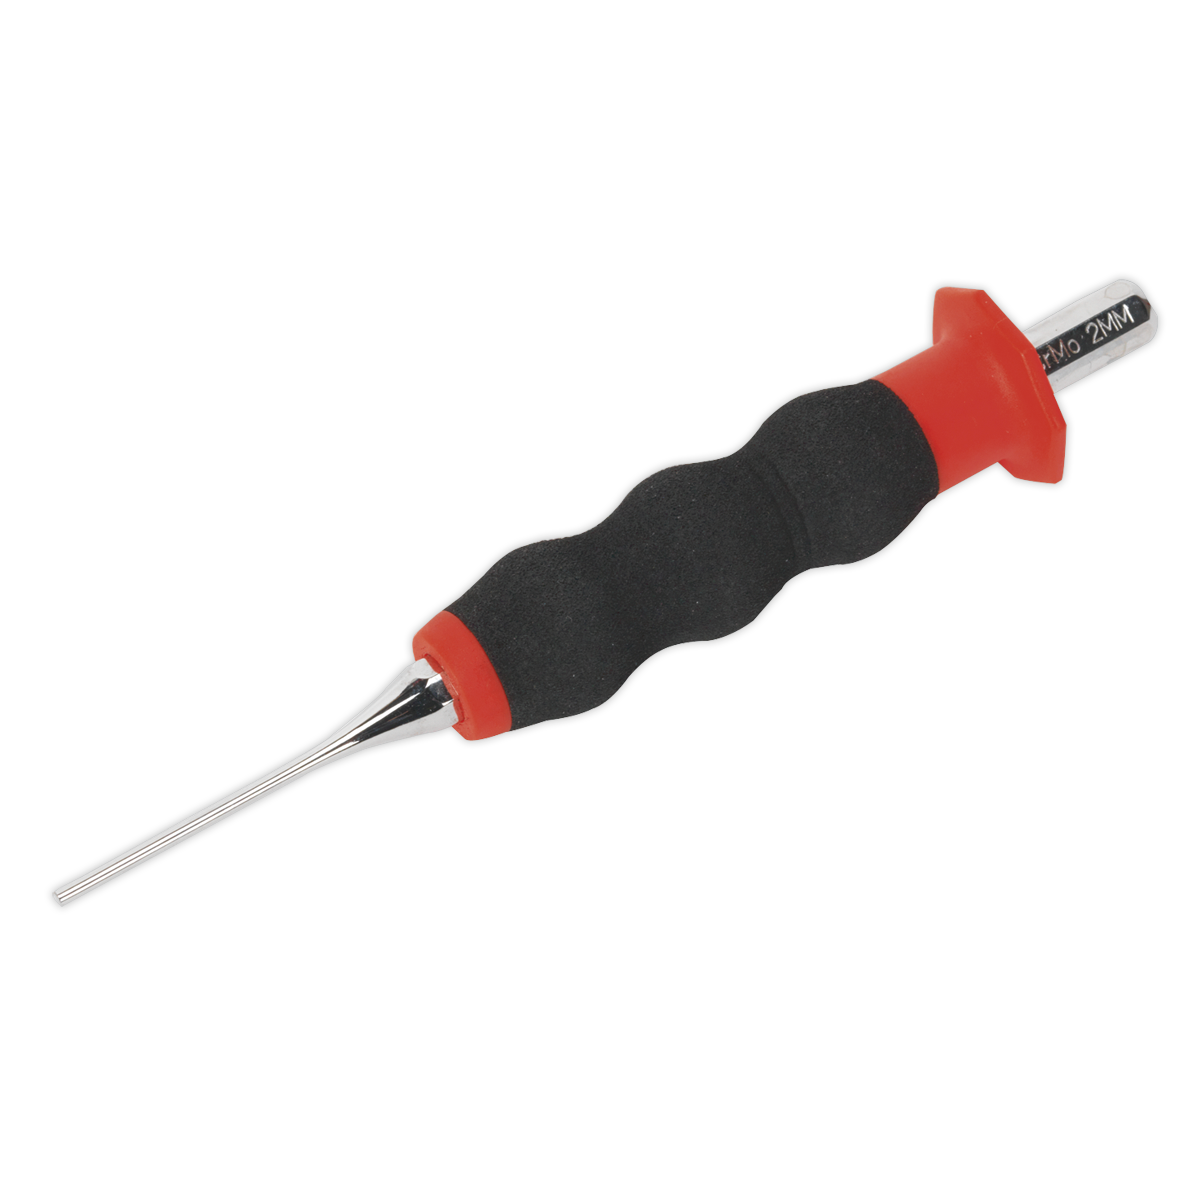 Sealey Ø2mm Sheathed Parallel Pin Punch AK91312